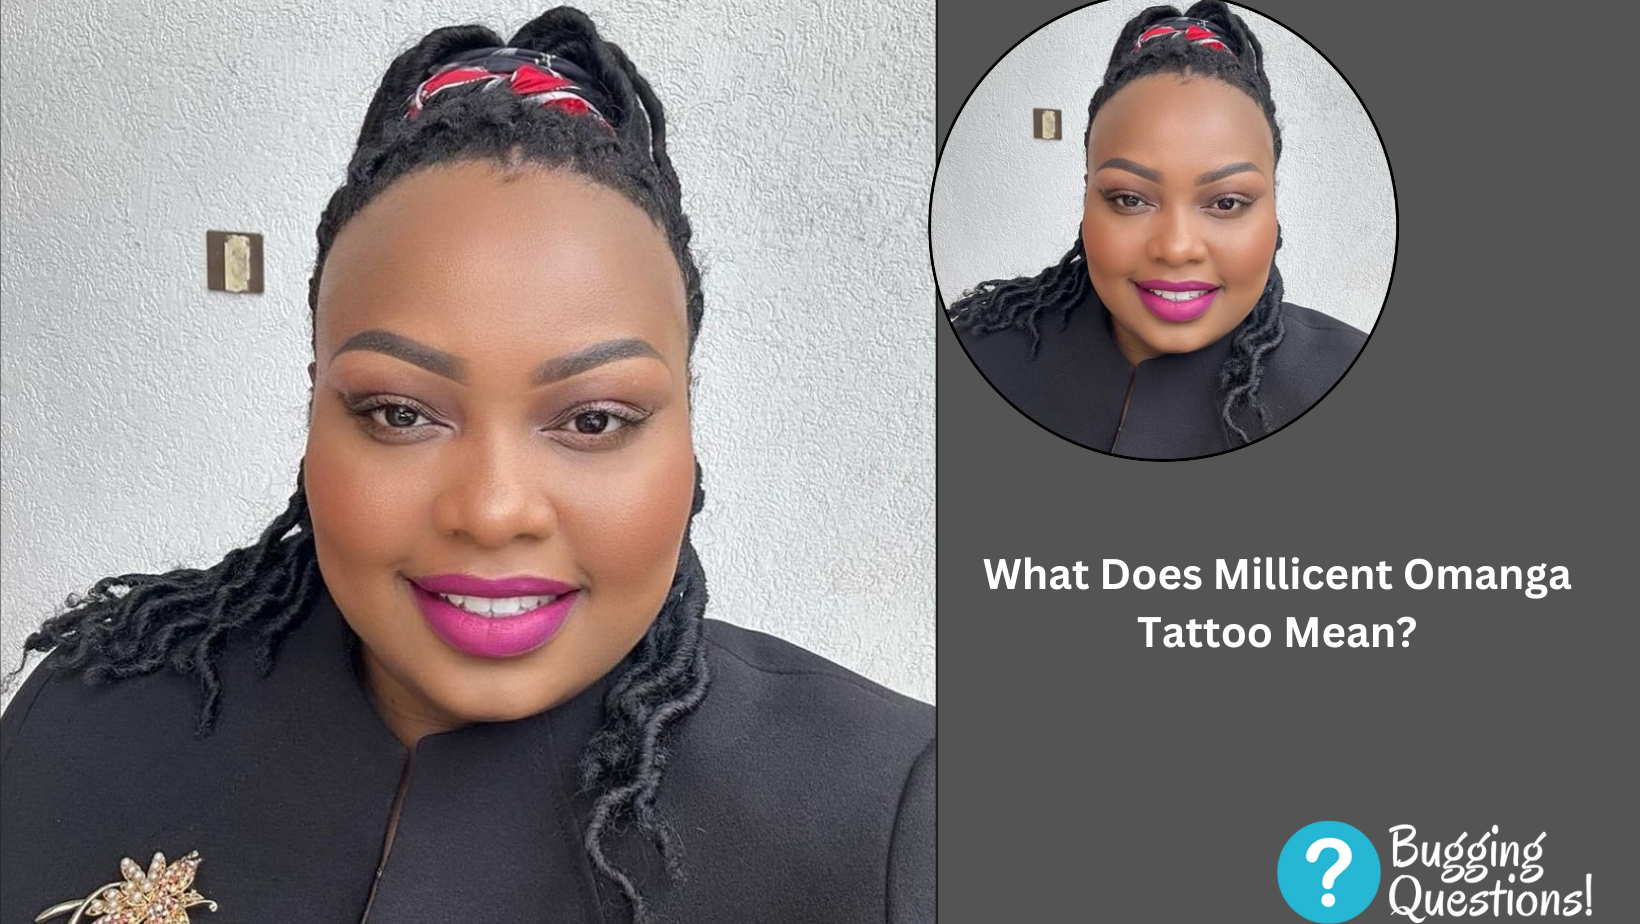 What Does Millicent Omanga Tattoo Mean?